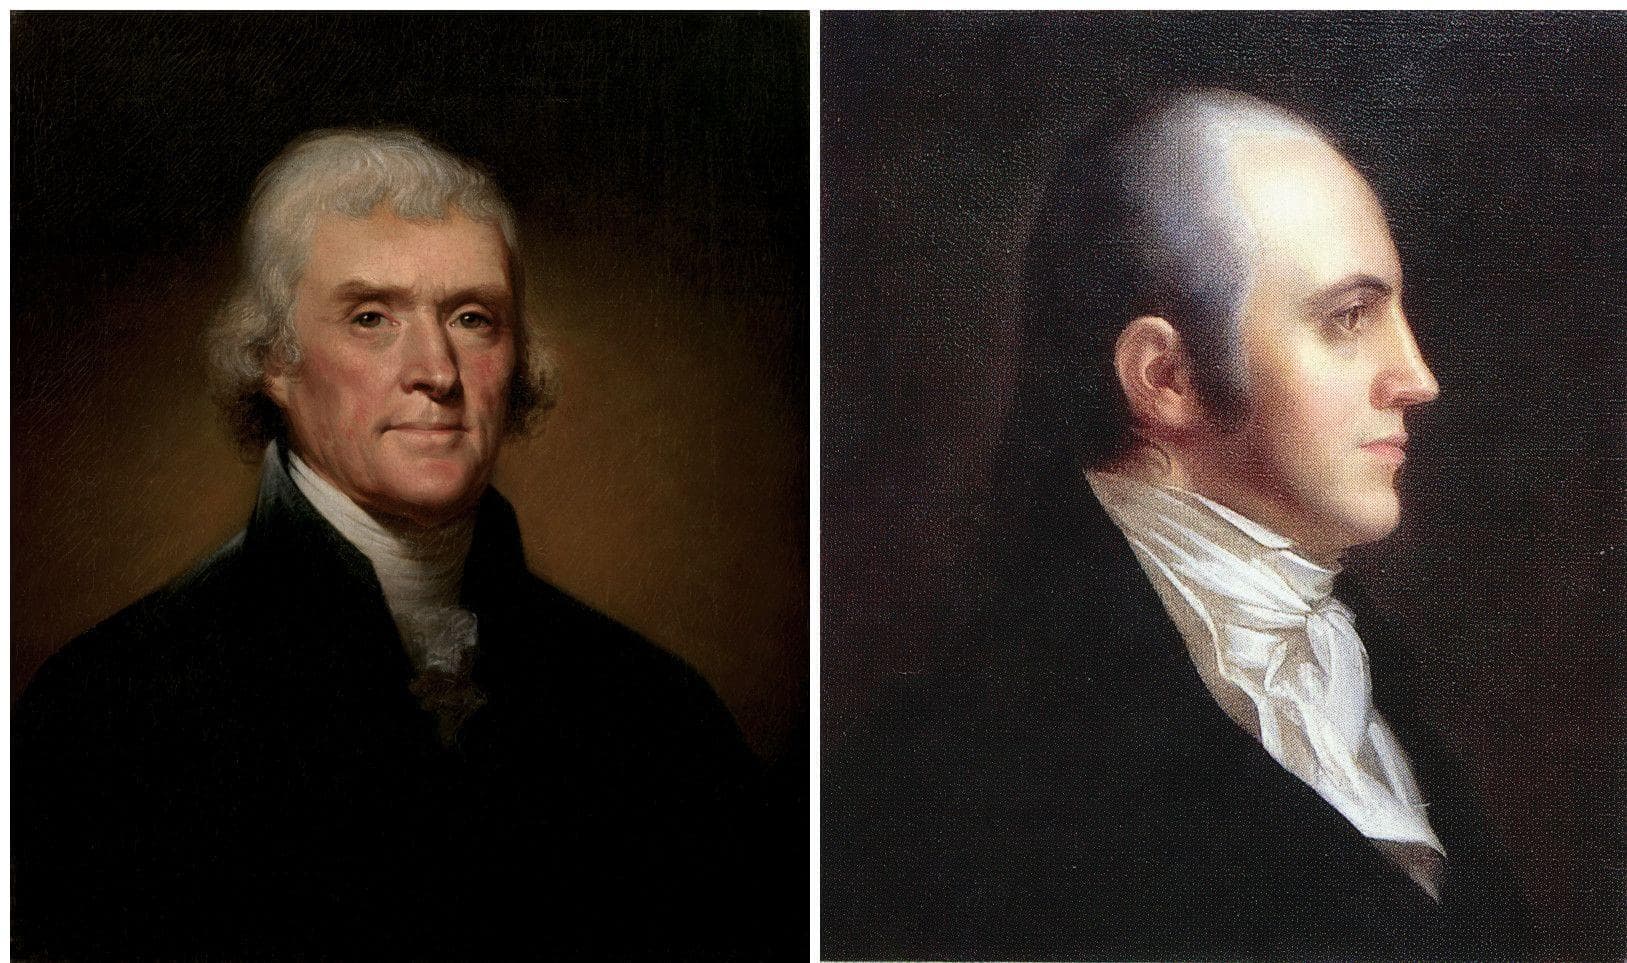 Random President/Vice President Pairs Who Didn't Get Along Too Well